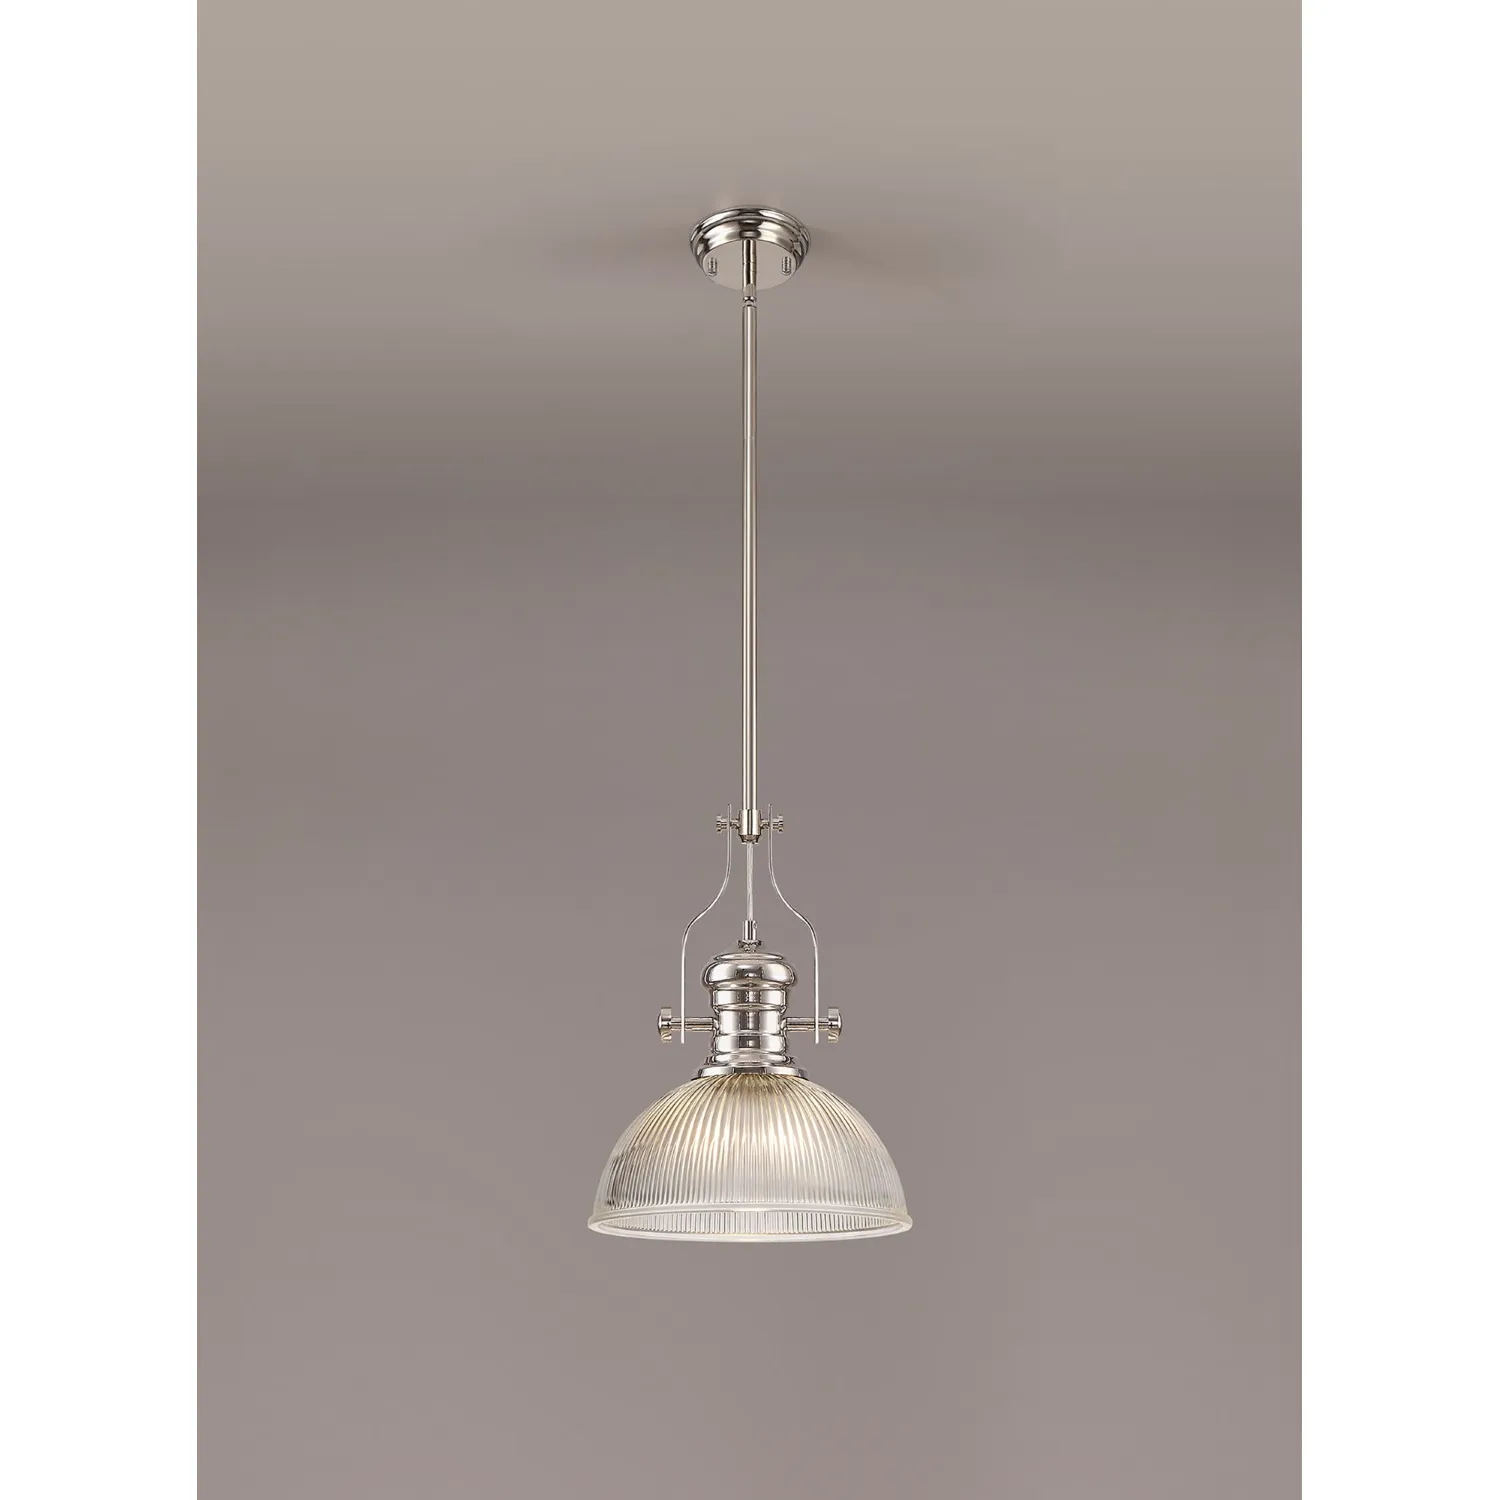 Sandy 1 Light Pendant E27 With 30cm Dome Glass Shade, Polished Nickel Clear